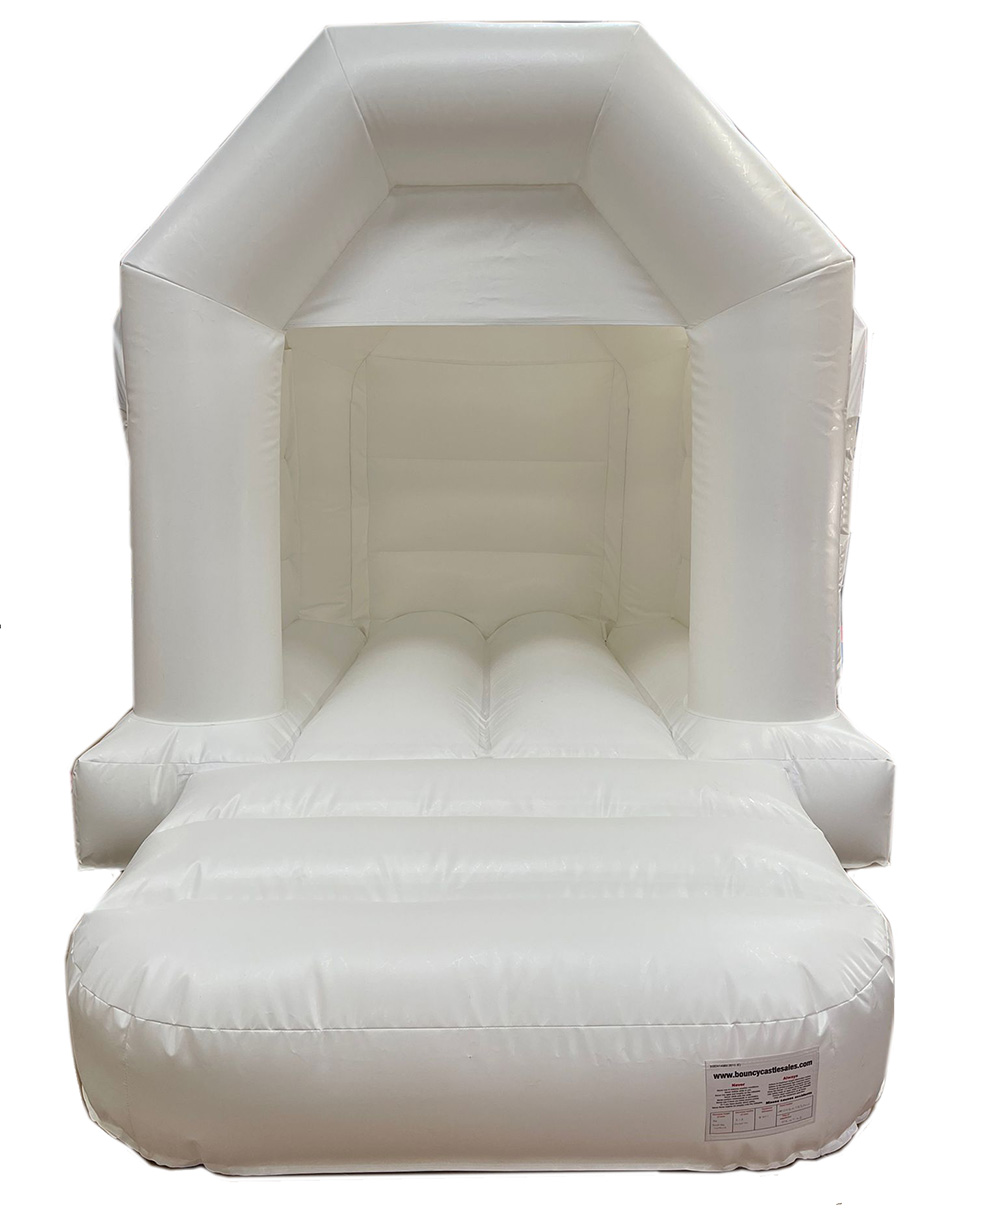 Bouncy Castle Sales - BC643 - Bouncy Inflatable for sale